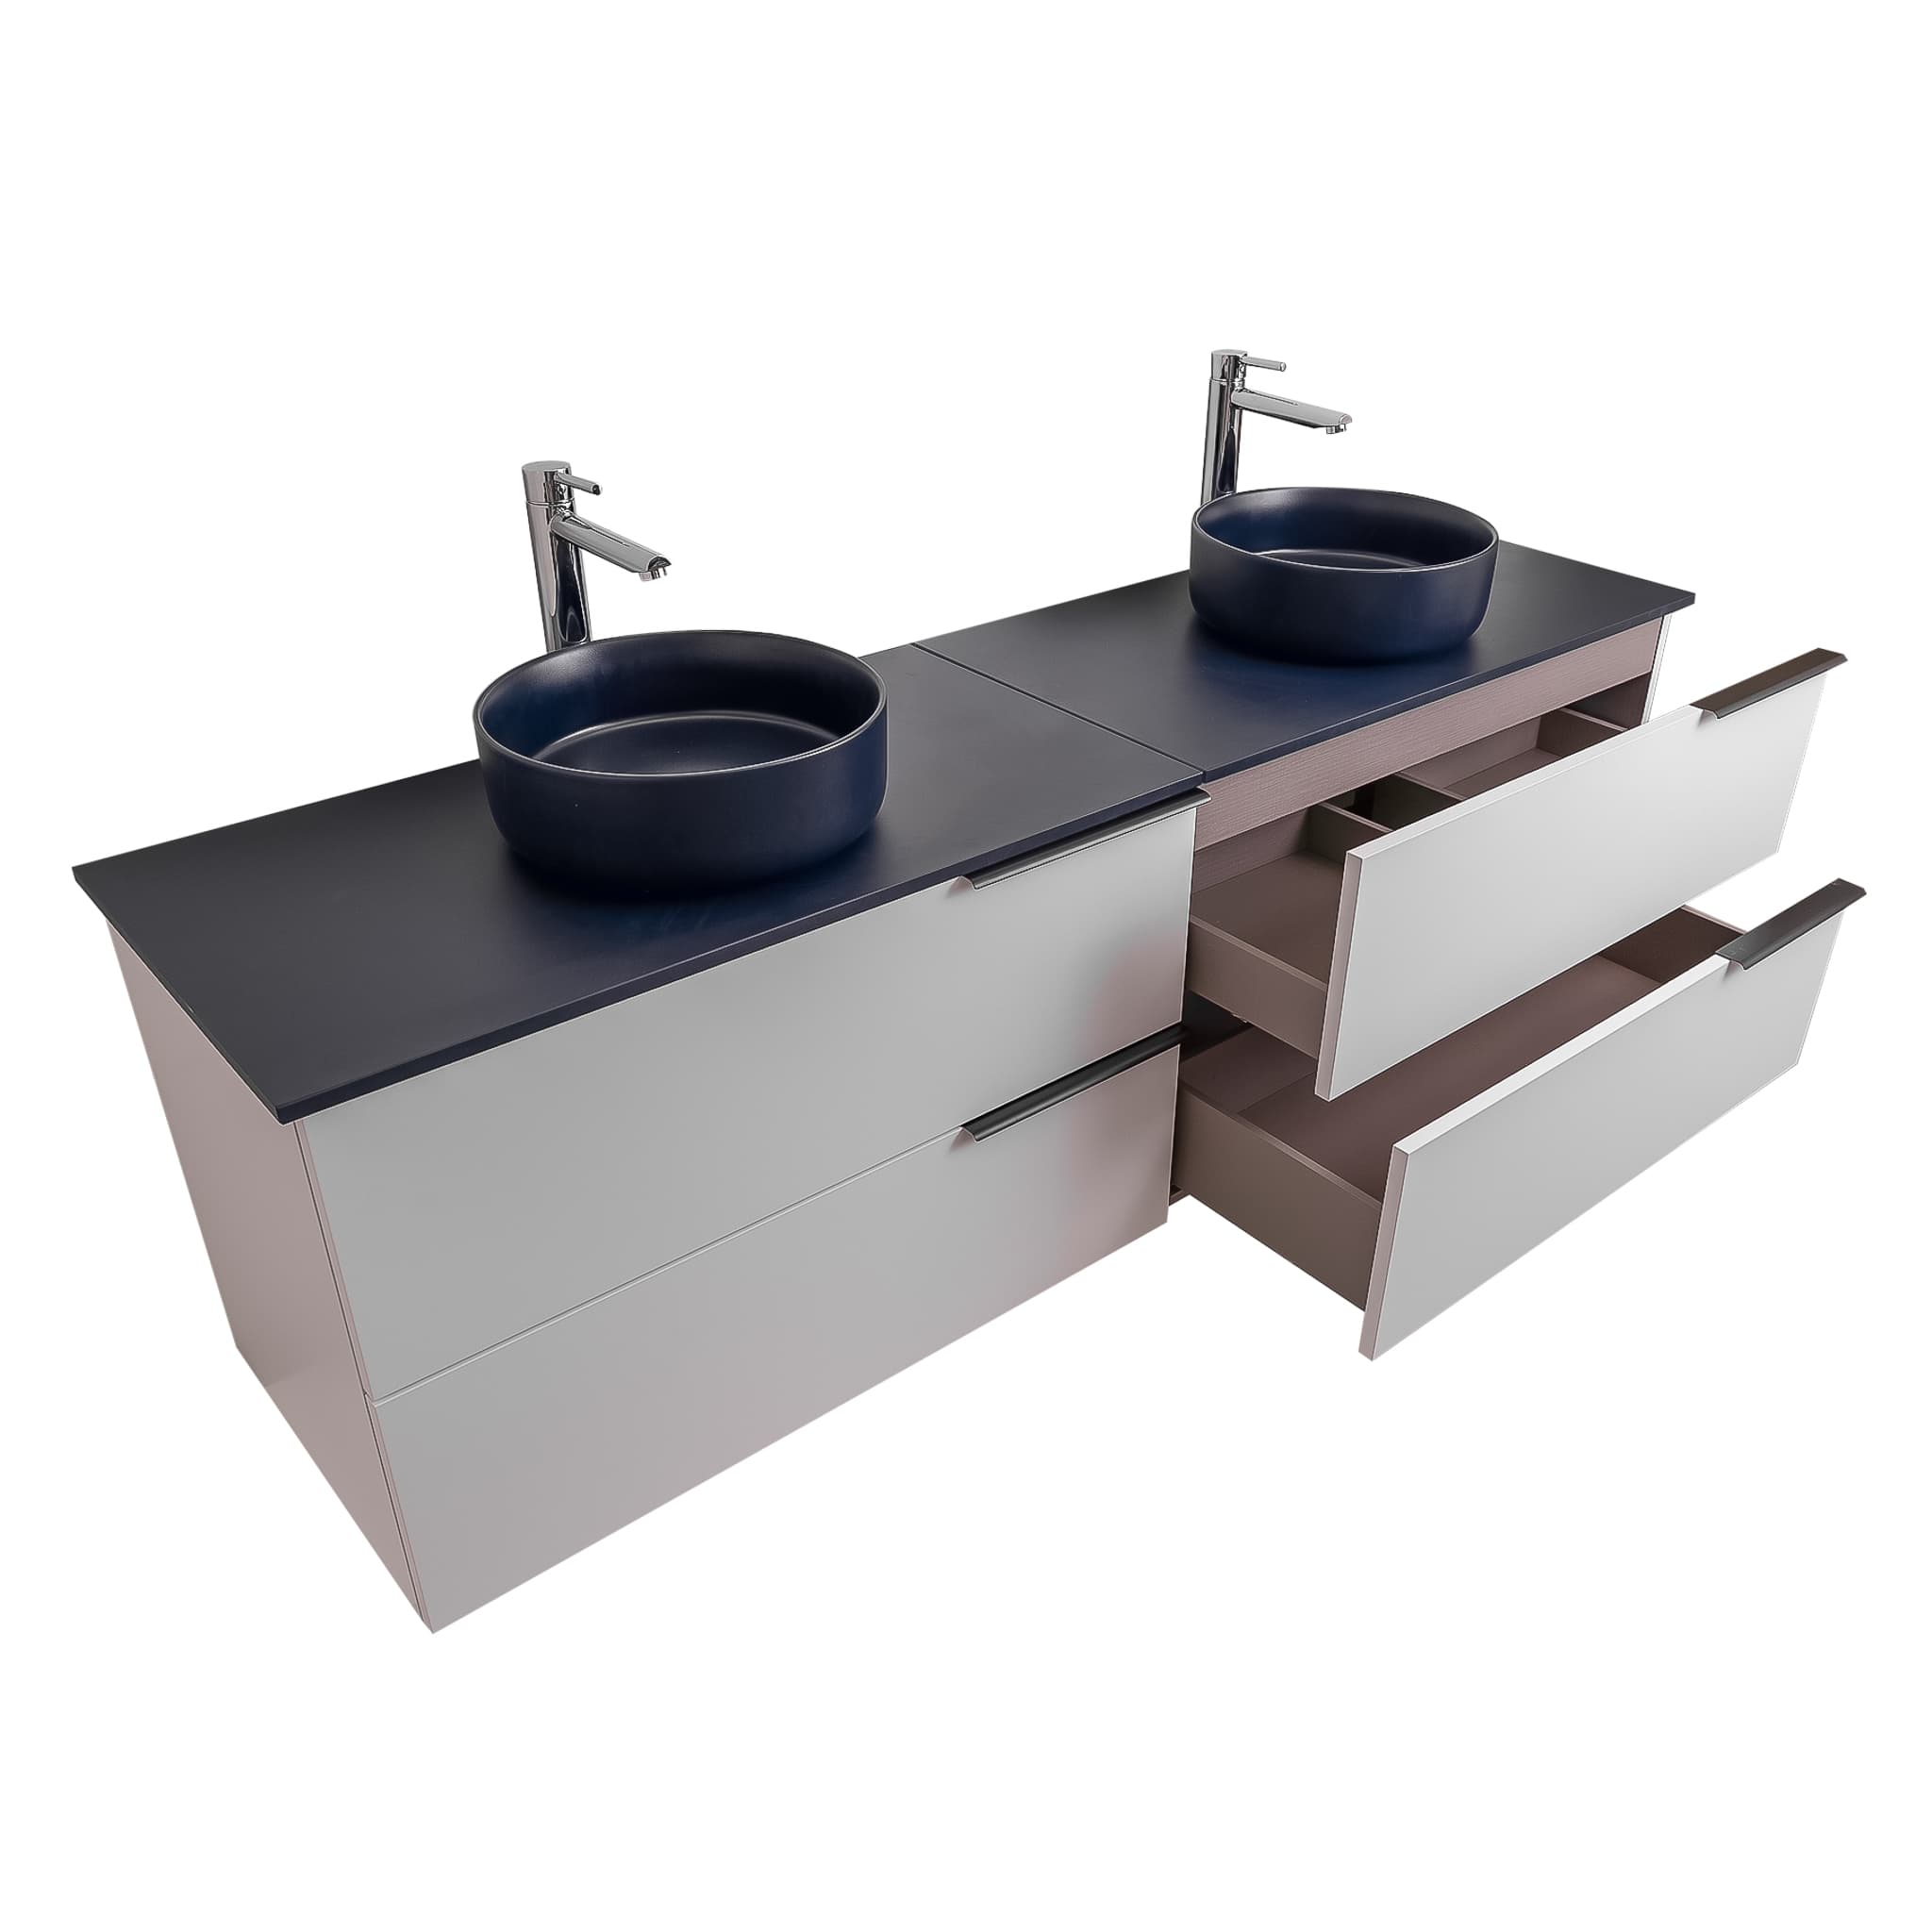 Mallorca 72 Matte White Cabinet, Ares Navy Blue Top And Two Ares Navy Blue Ceramic Basin, Wall Mounted Modern Vanity Set